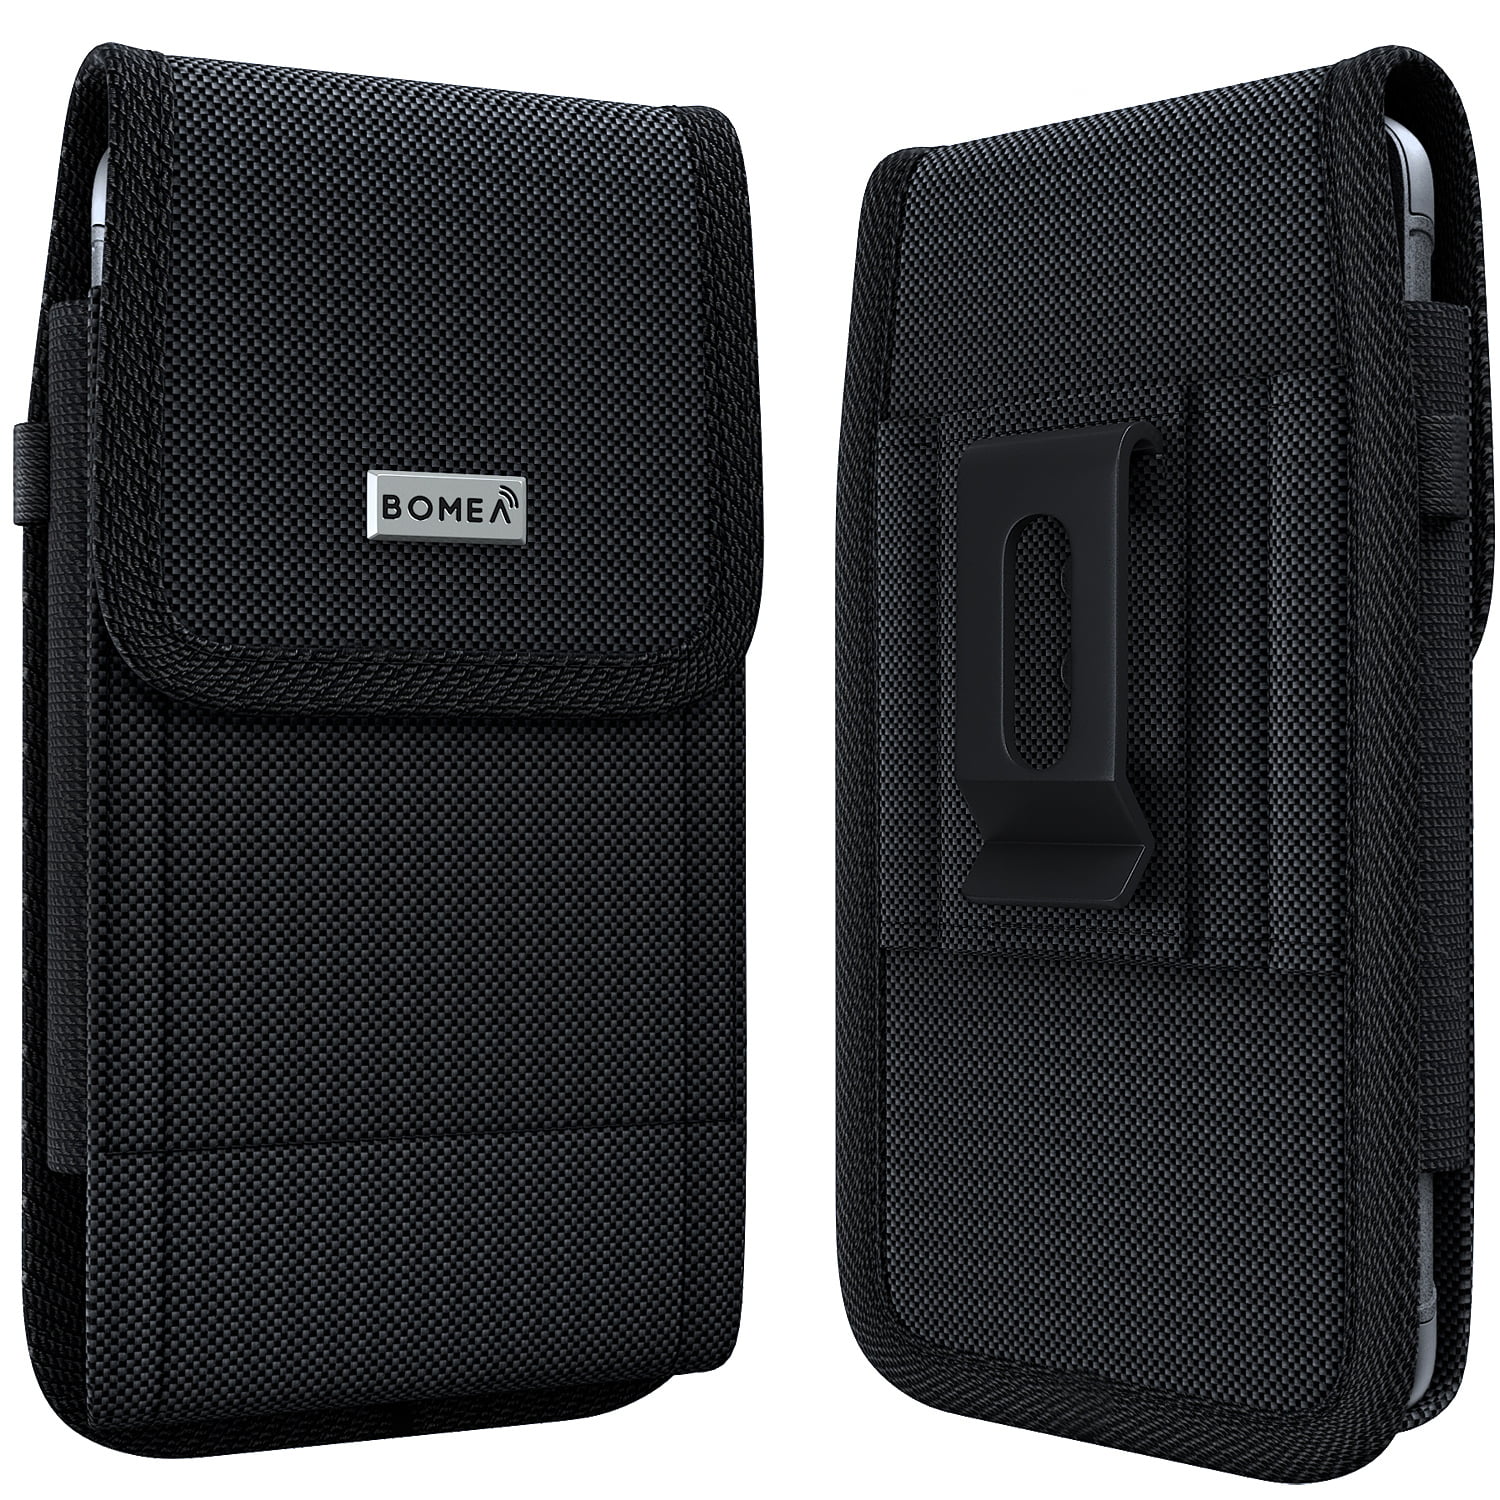 iPhone 11 Pro Max/Xs Max Holster Case - Rugged Nylon Belt Clip Case Cell Phone Carrying Pouch ...